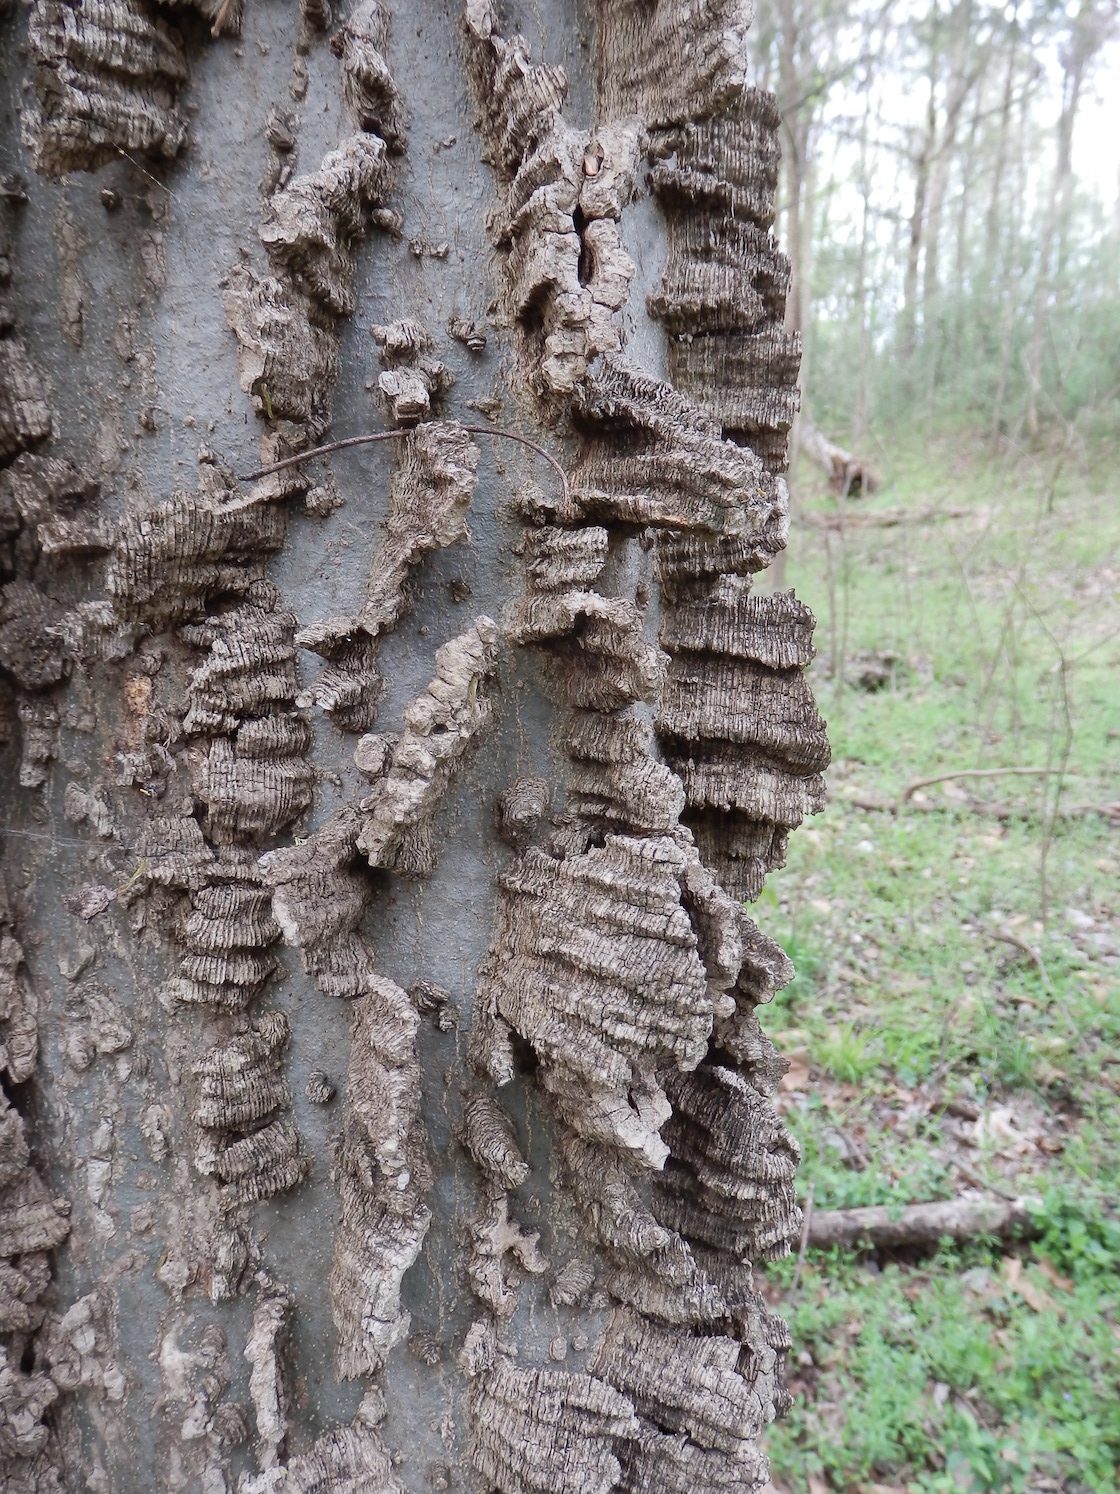 The Scientific Name is Celtis laevigata. You will likely hear them called Southern Hackberry, Sugarberry. This picture shows the Close-up of bark ridges. of Celtis laevigata